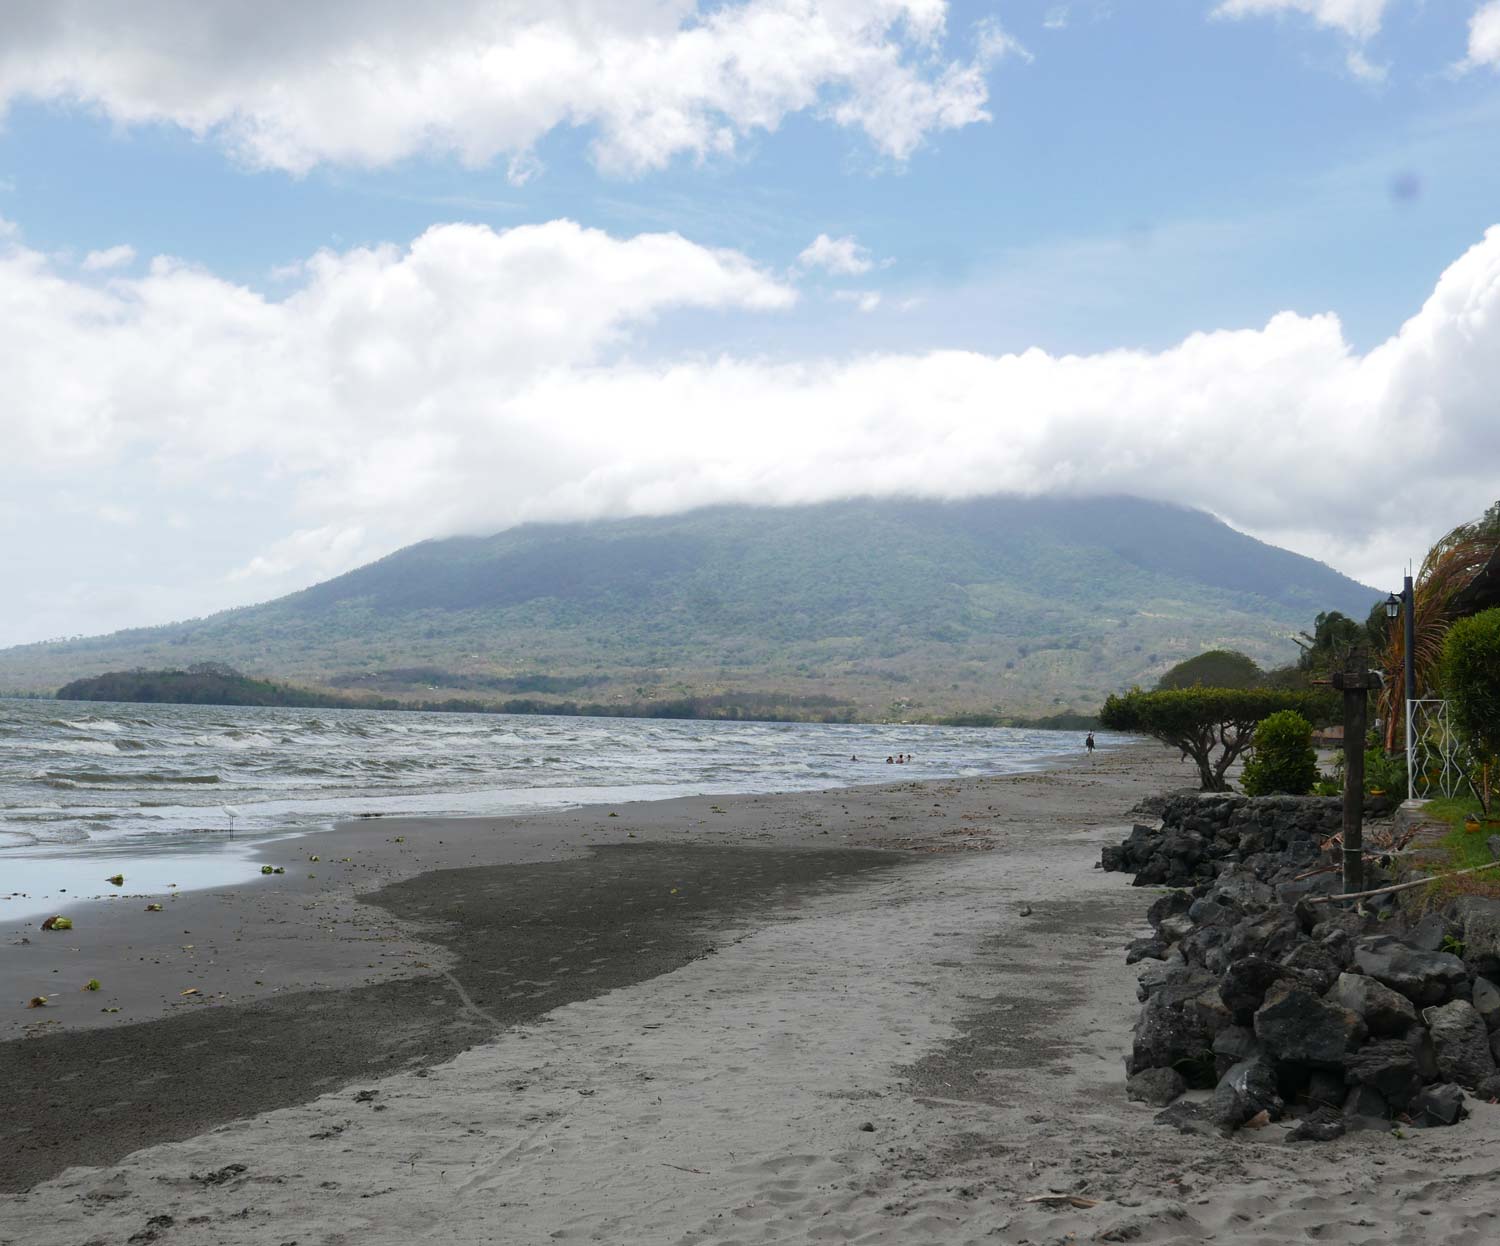 Playa San Fernando on Ometepe island in Nicaragua, with a view of Volcan Maderas